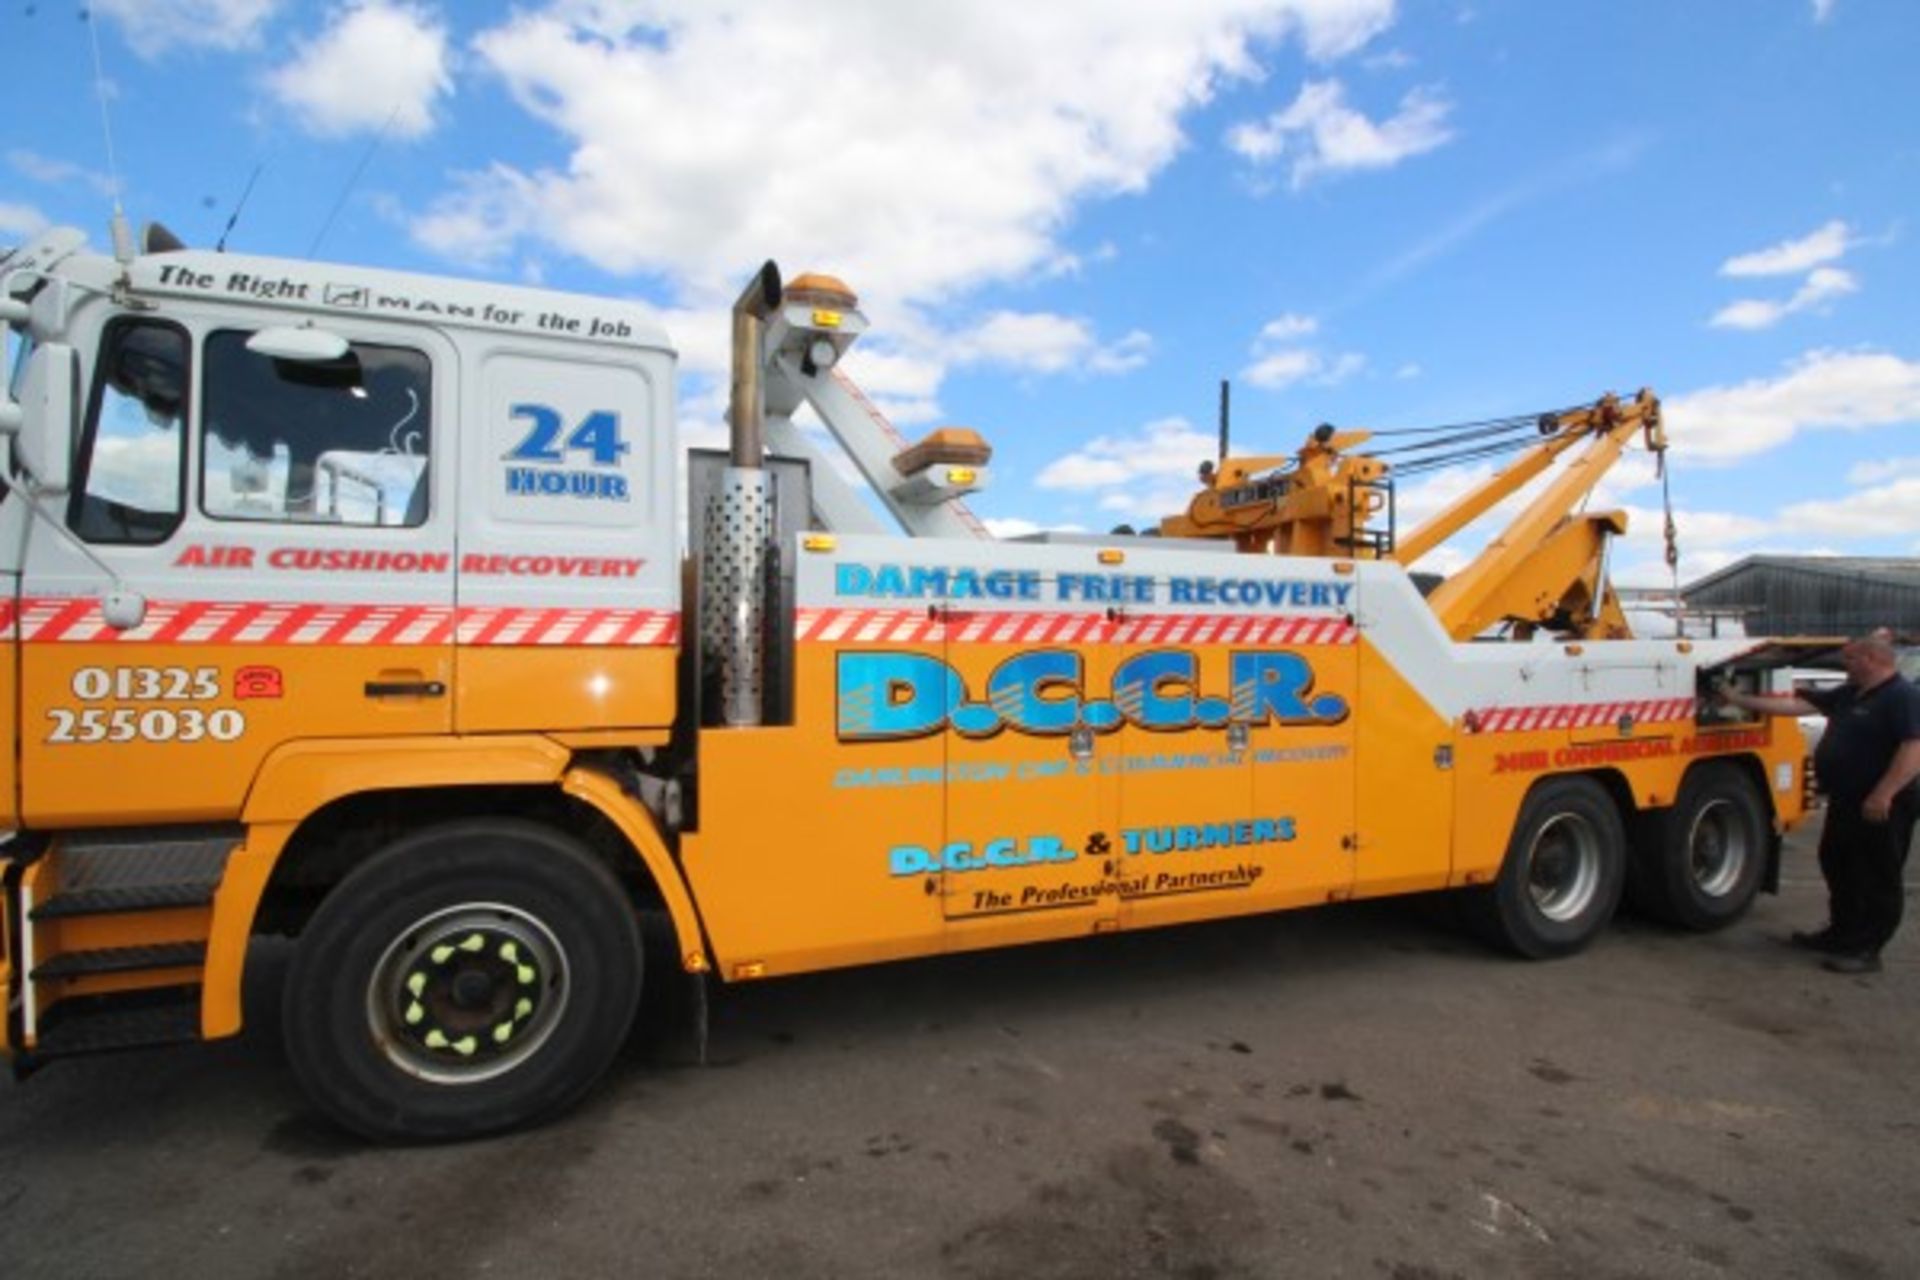 N444 TOW. 1996, MAN ECO240, 6x4 HEAVY DUTY UNDER LIFT RECOVERY TRUCK, 26-TONNE GROSS VEHICLE WEIGHT, - Image 11 of 31